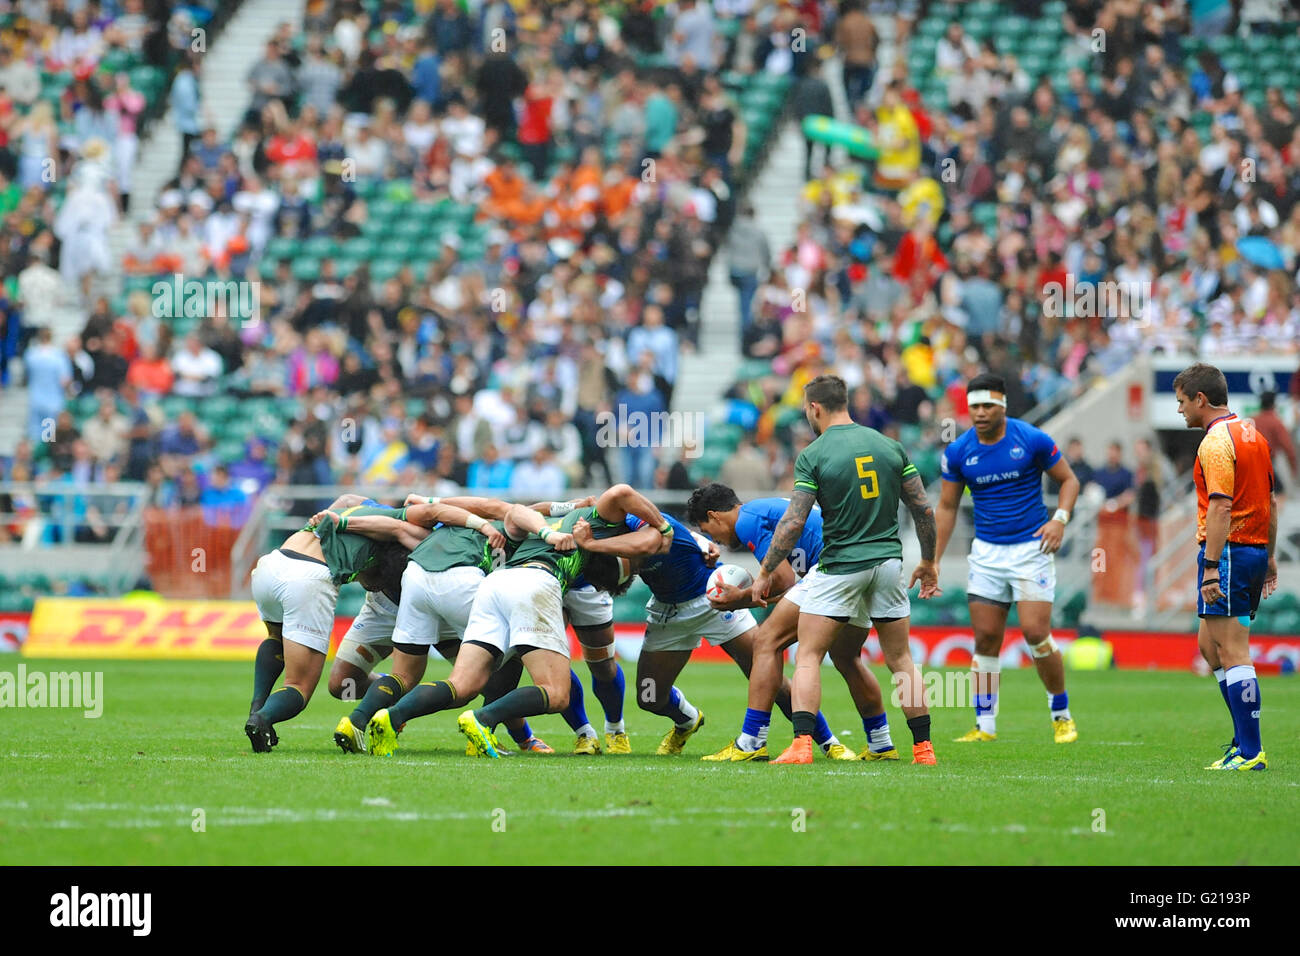 London, UK. 21st May, 2016. Samoa about to introduce the ball to the scrum during their pool match against South Africa, HSBC World Rugby Sevens Series, Twickenham Stadium, London, UK. South Africa went on to win the match by 22-0. Credit:  Michael Preston/Alamy Live News Stock Photo